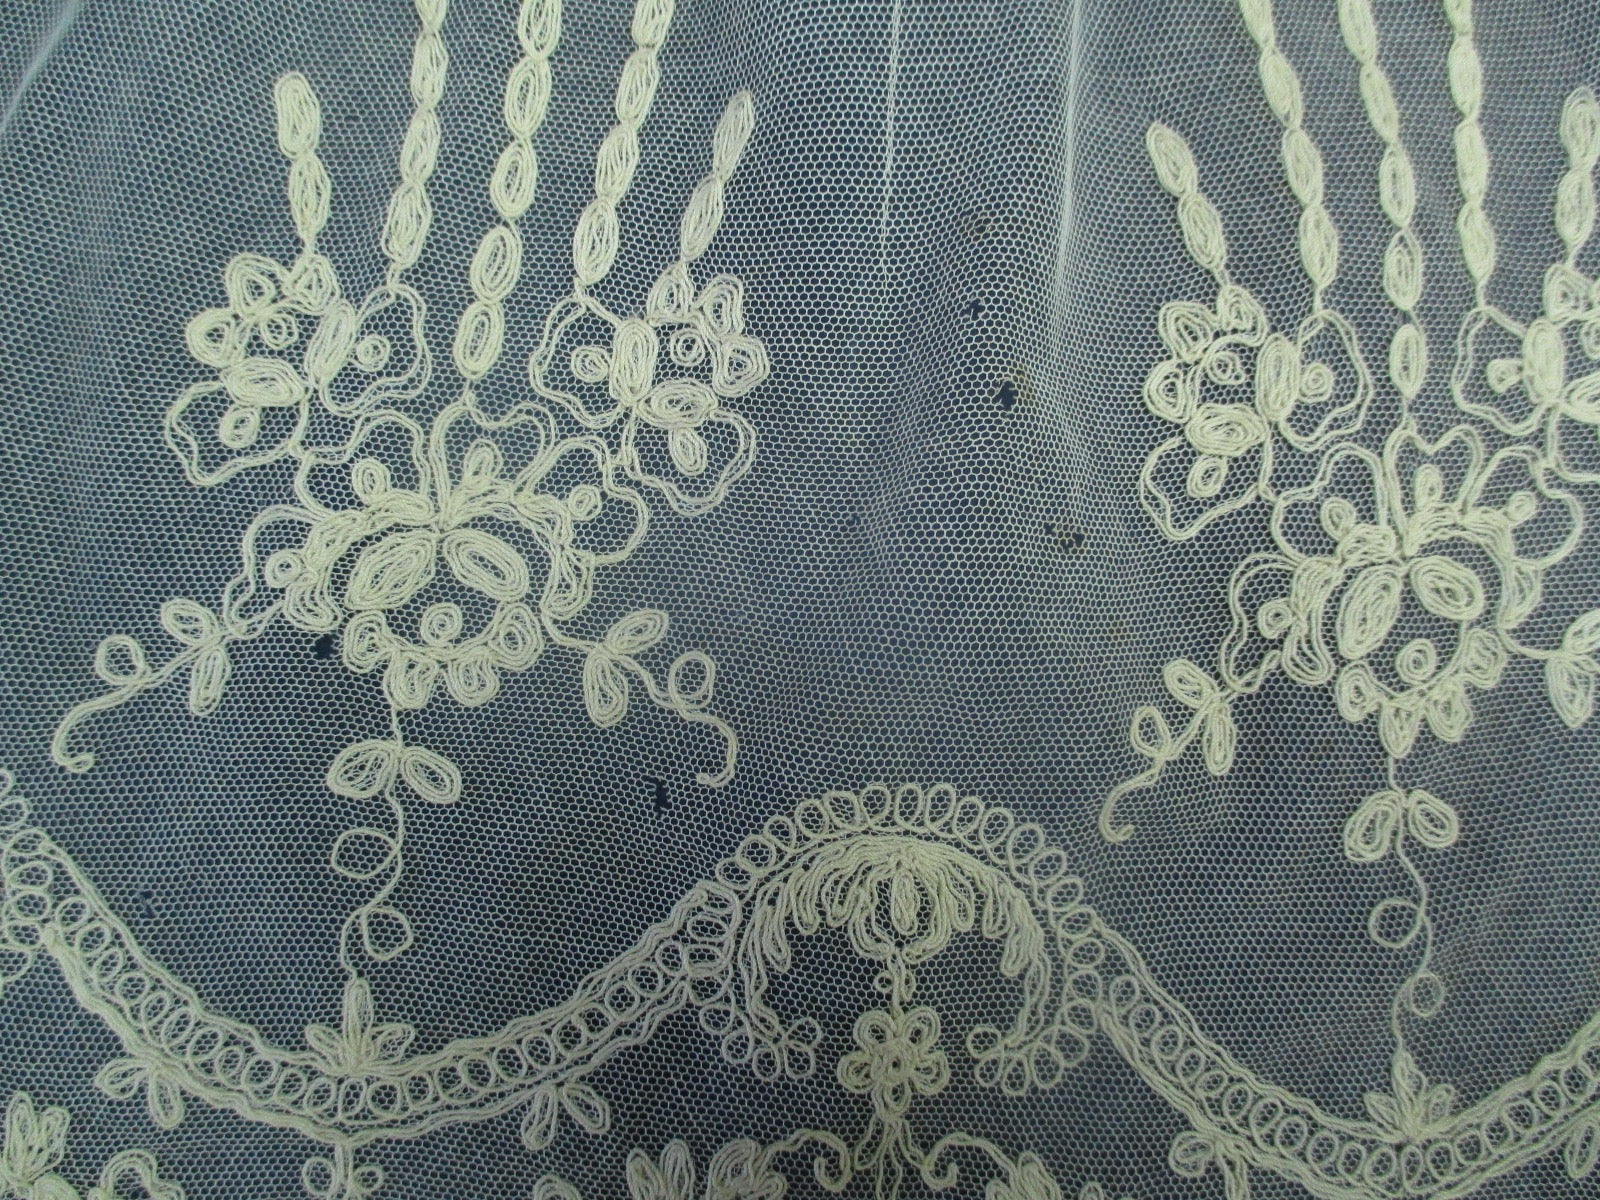 Antique Victorian Embroidered lace piece